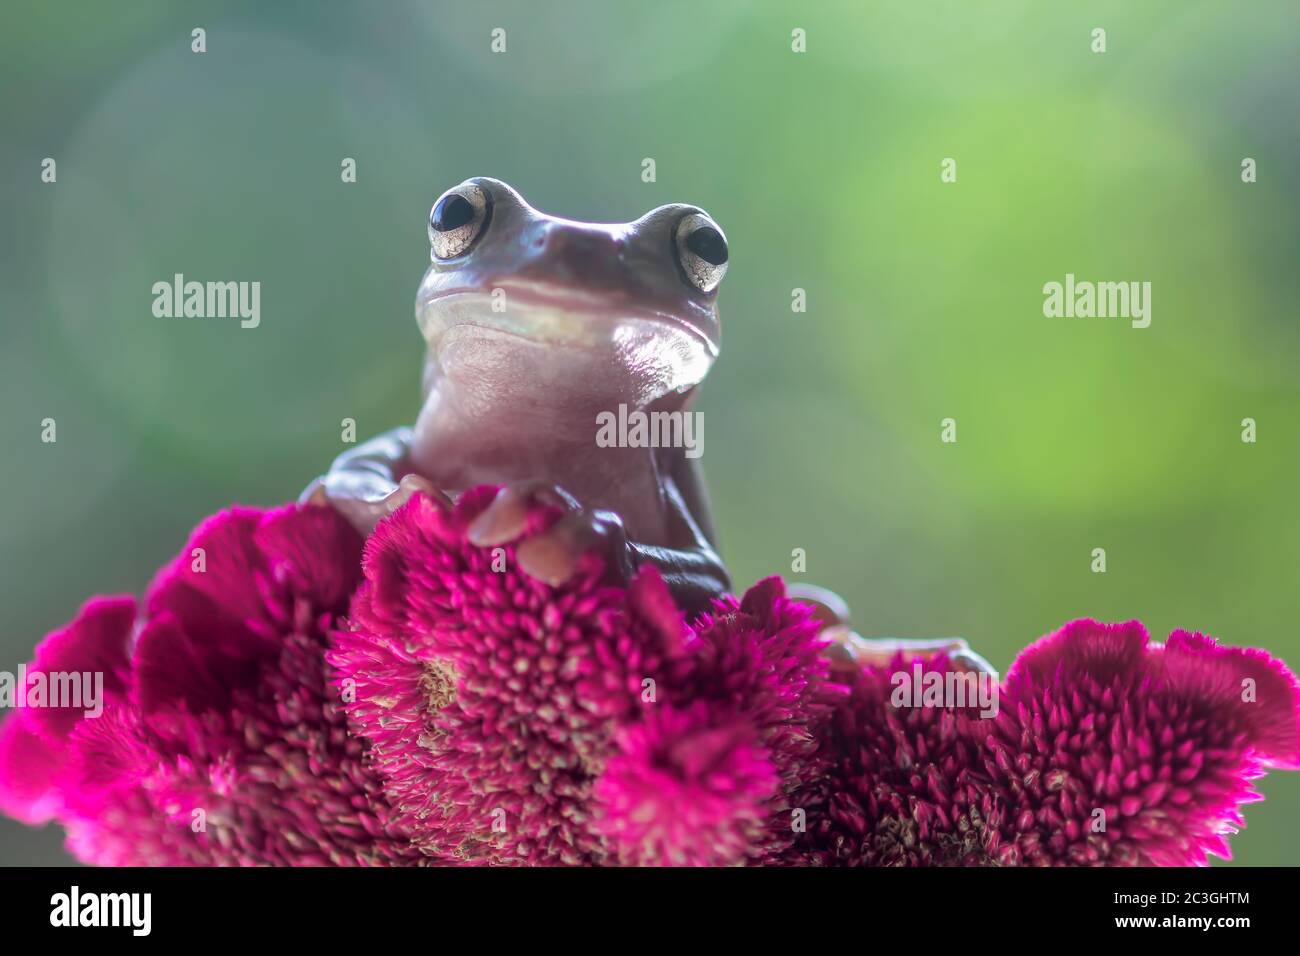 frogs, tree frogs, dumpy frogs in tree branches or flowers Stock Photo